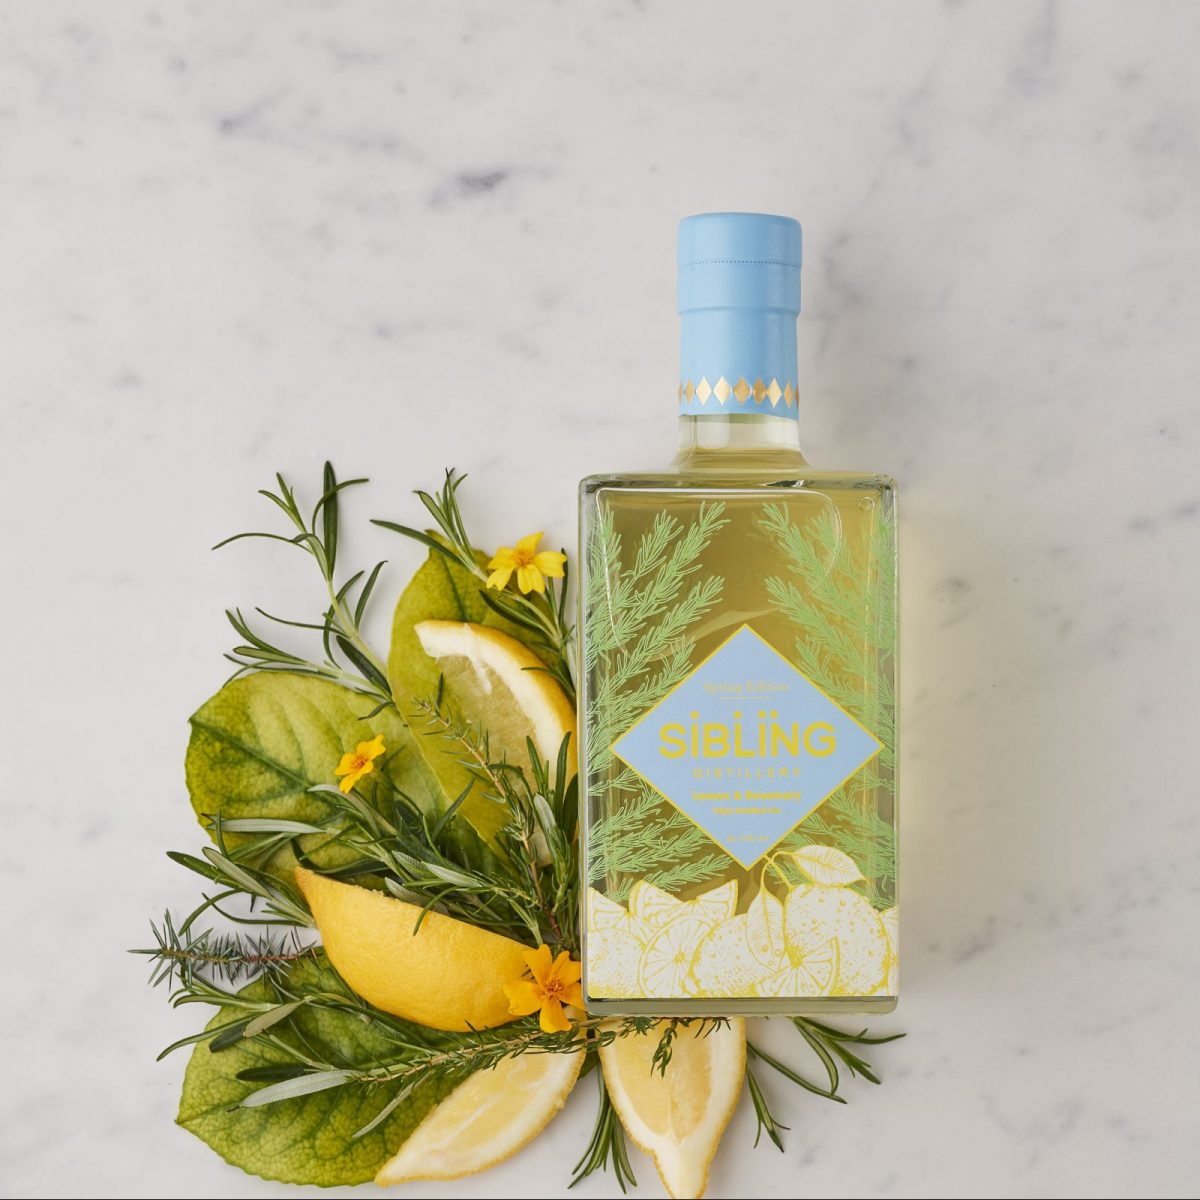 Image of Sibling Gin - Spring Edition made in the UK by Sibling Distillery. Buying this product supports a UK business, jobs and the local community